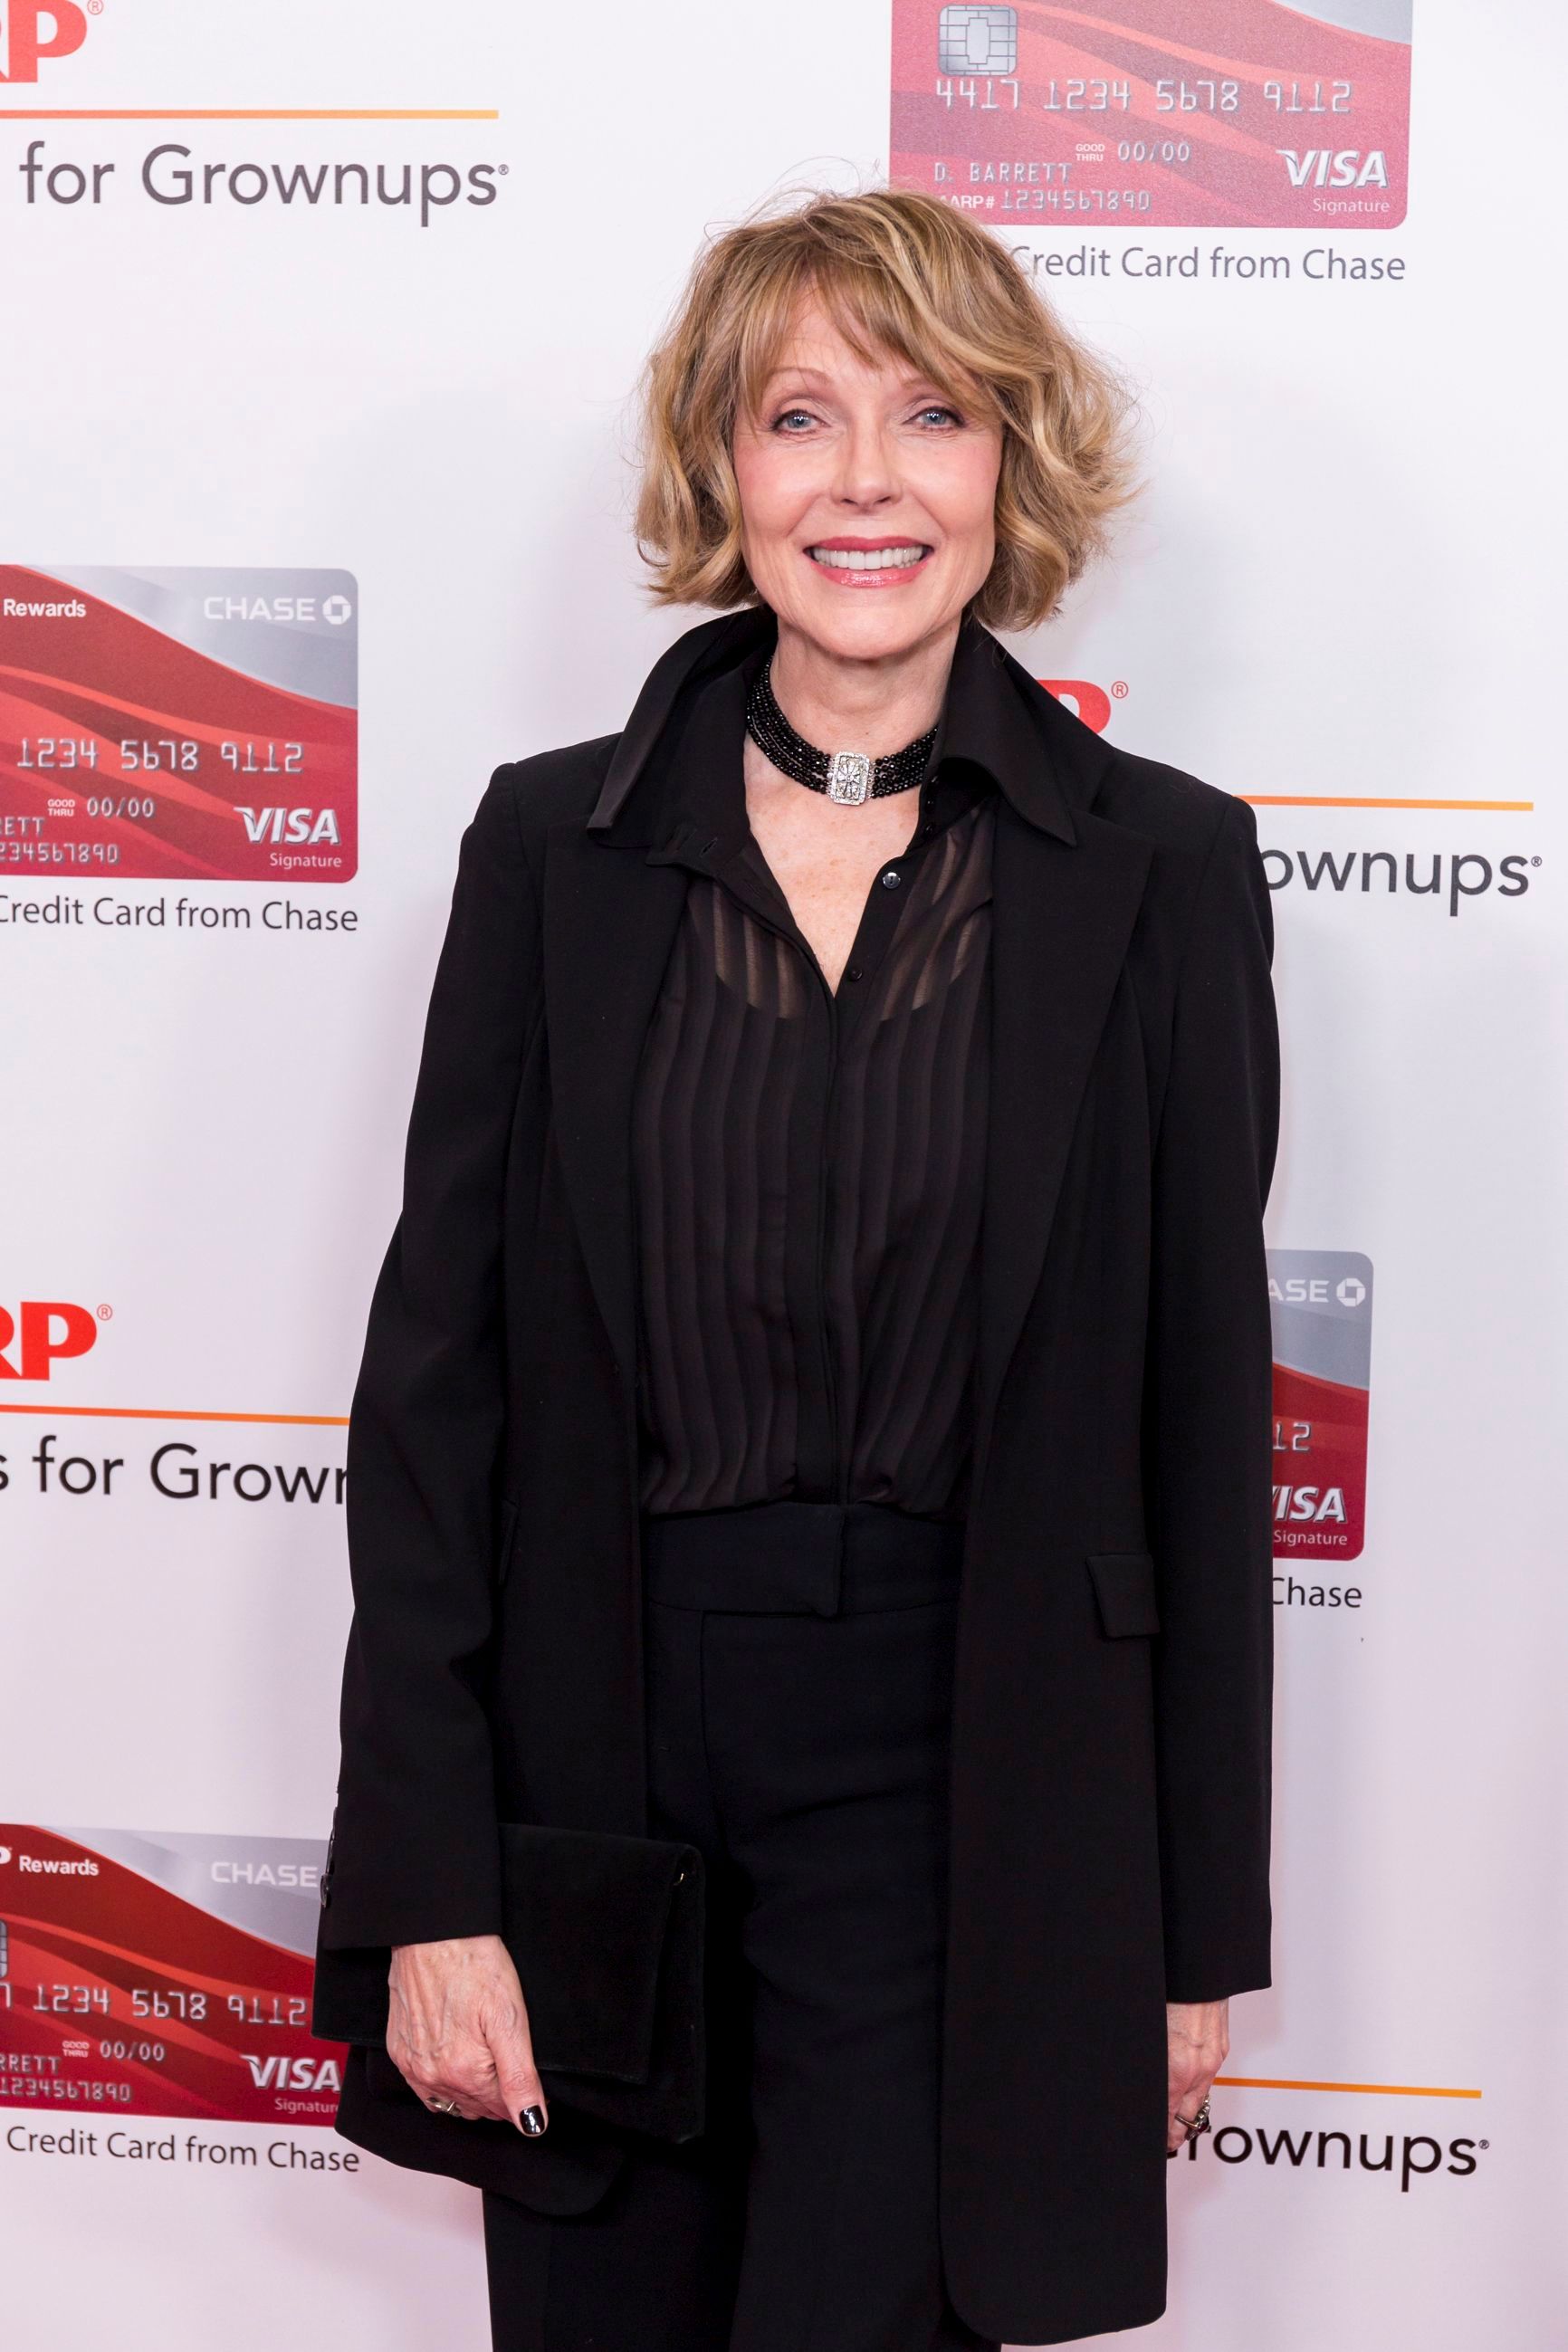 Actress Susan Blakely Likes to 'Laugh' About Her Early Career